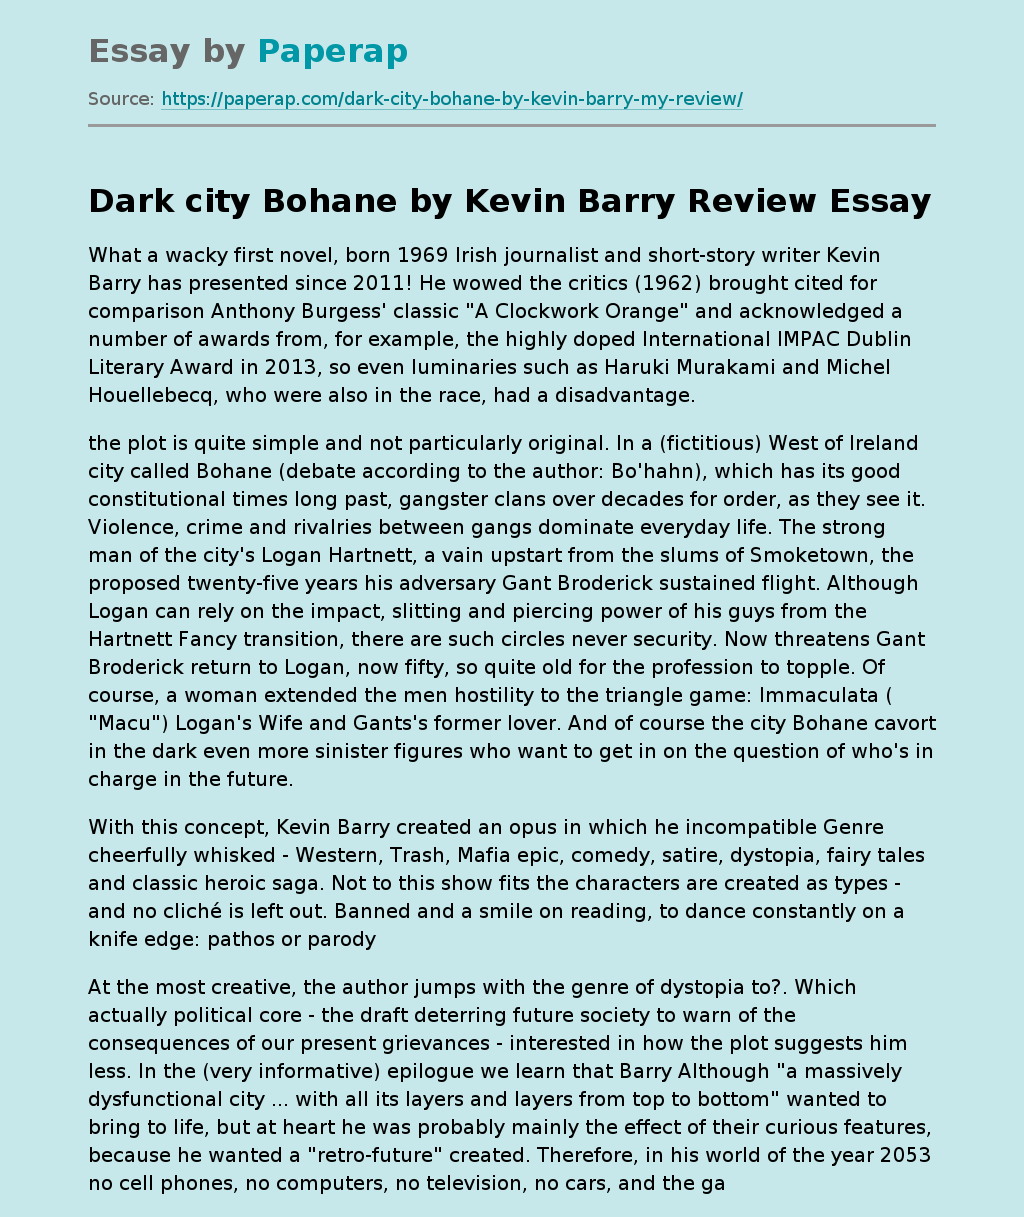 "City of Bohane" by Kevin Barry